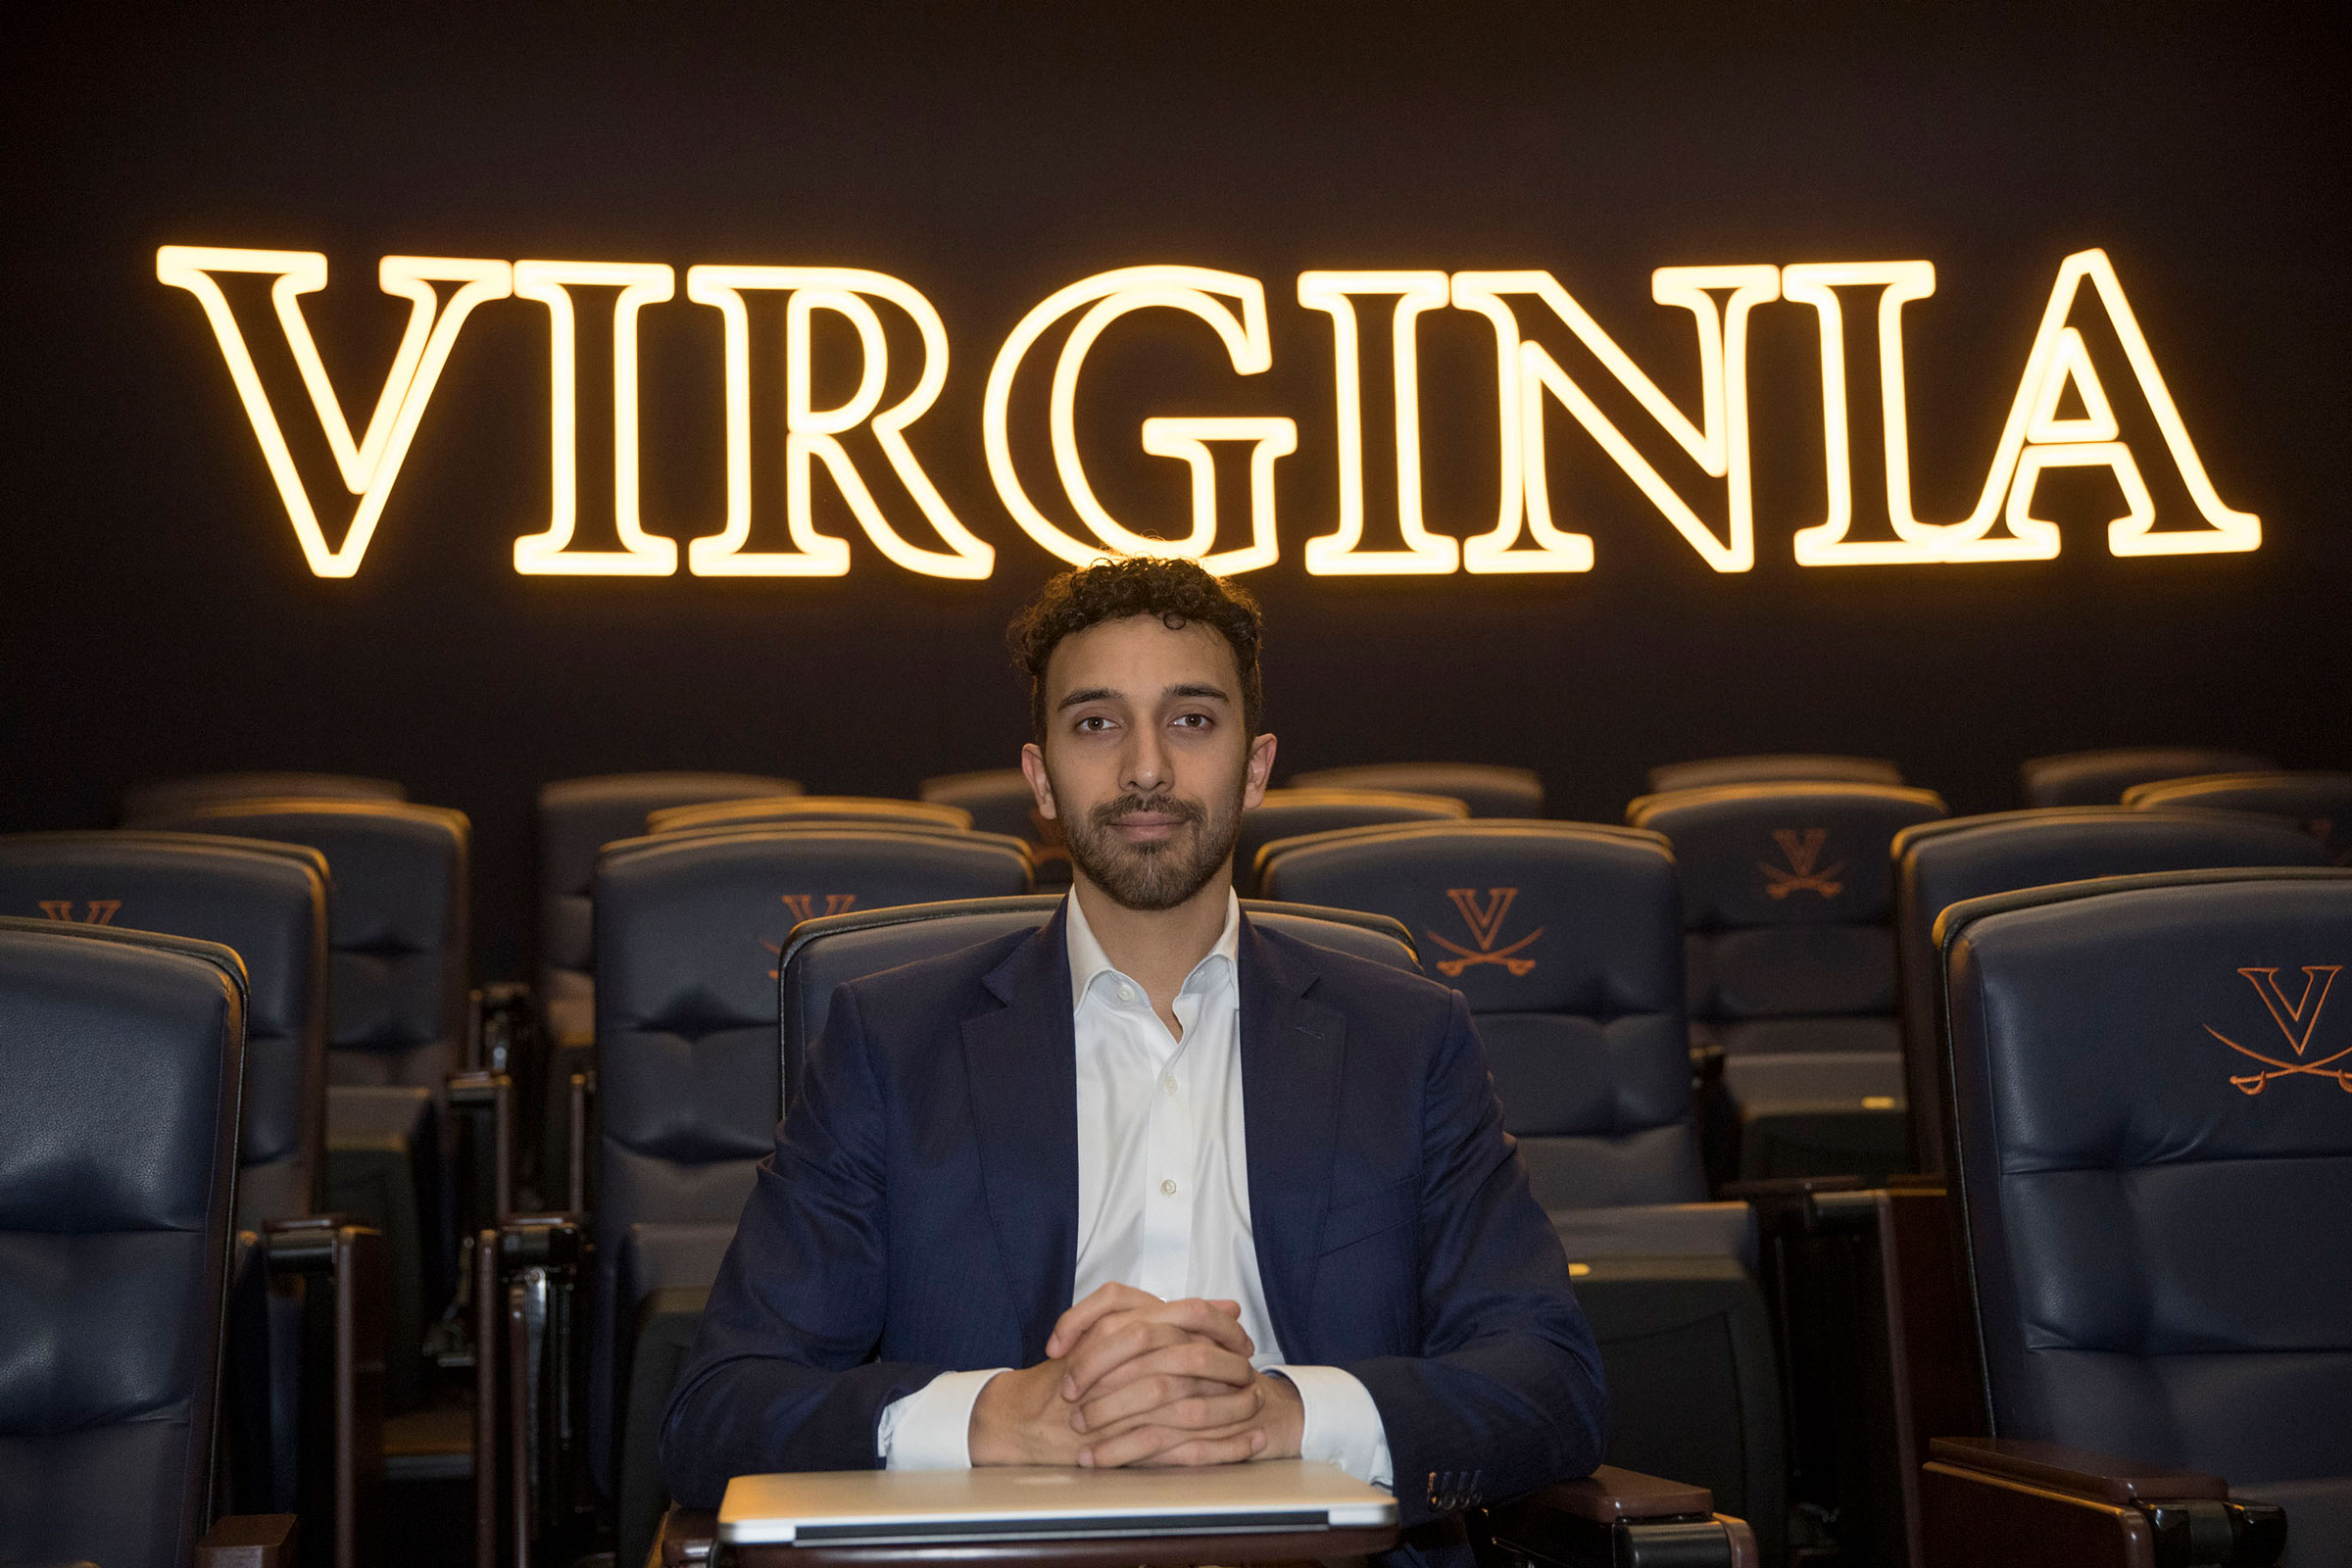 Johnny Carpenter sits in a chair with neon lights spelling Virginia